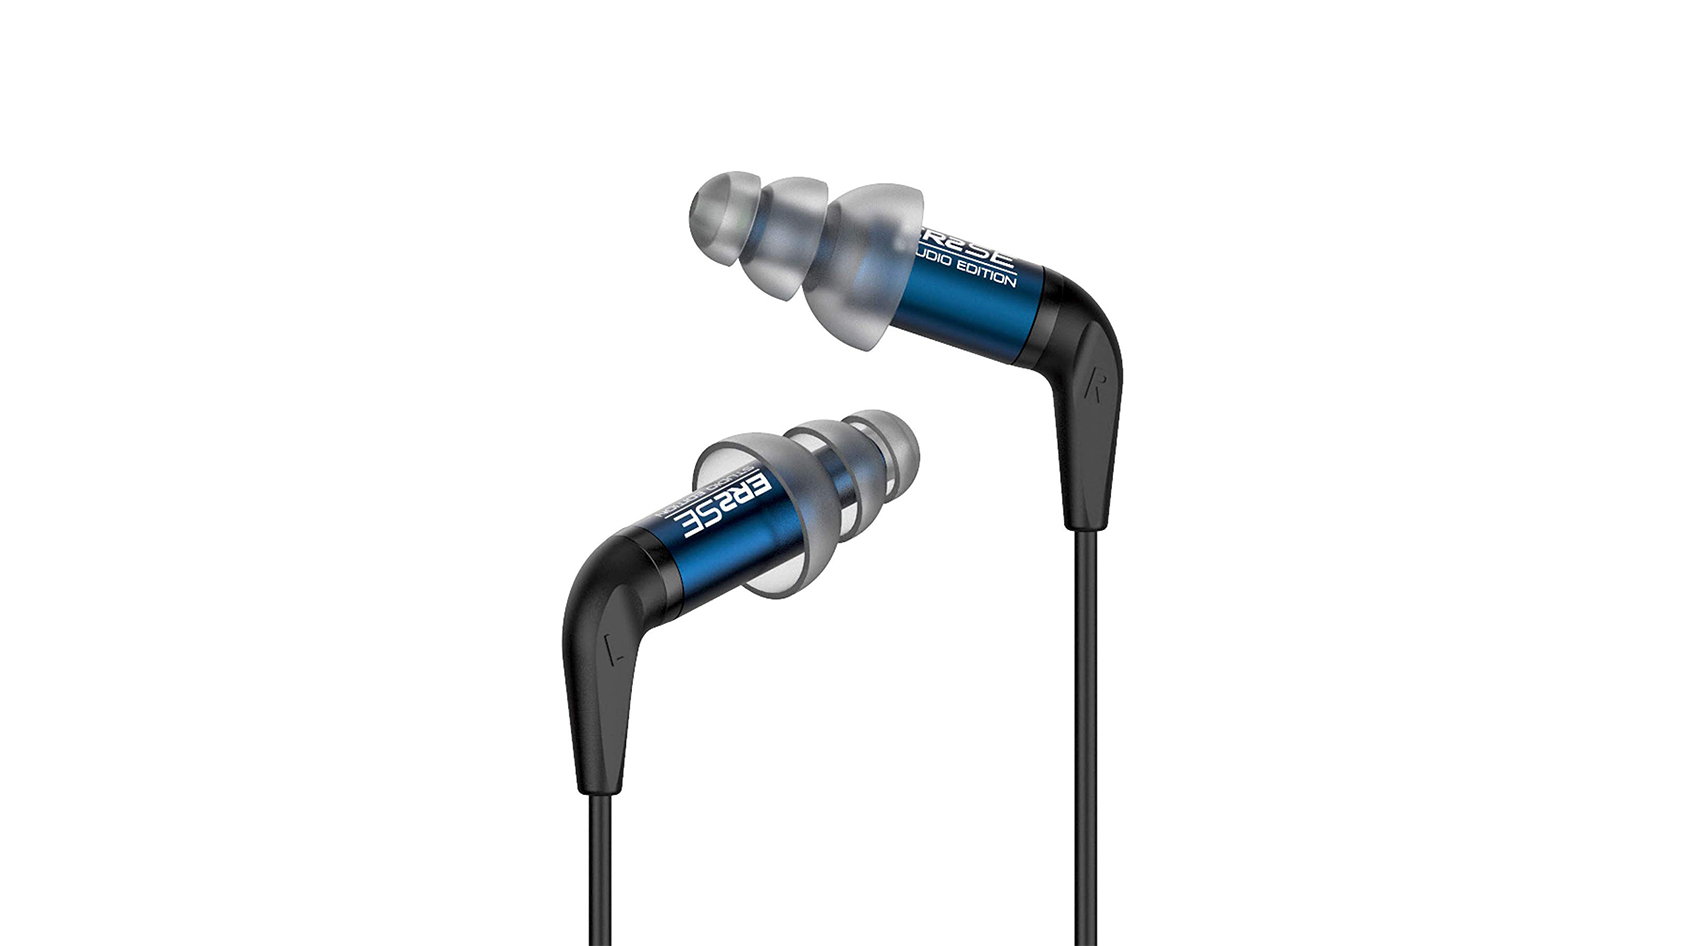 A pair of Etymotic ER2SE earbuds on a white background